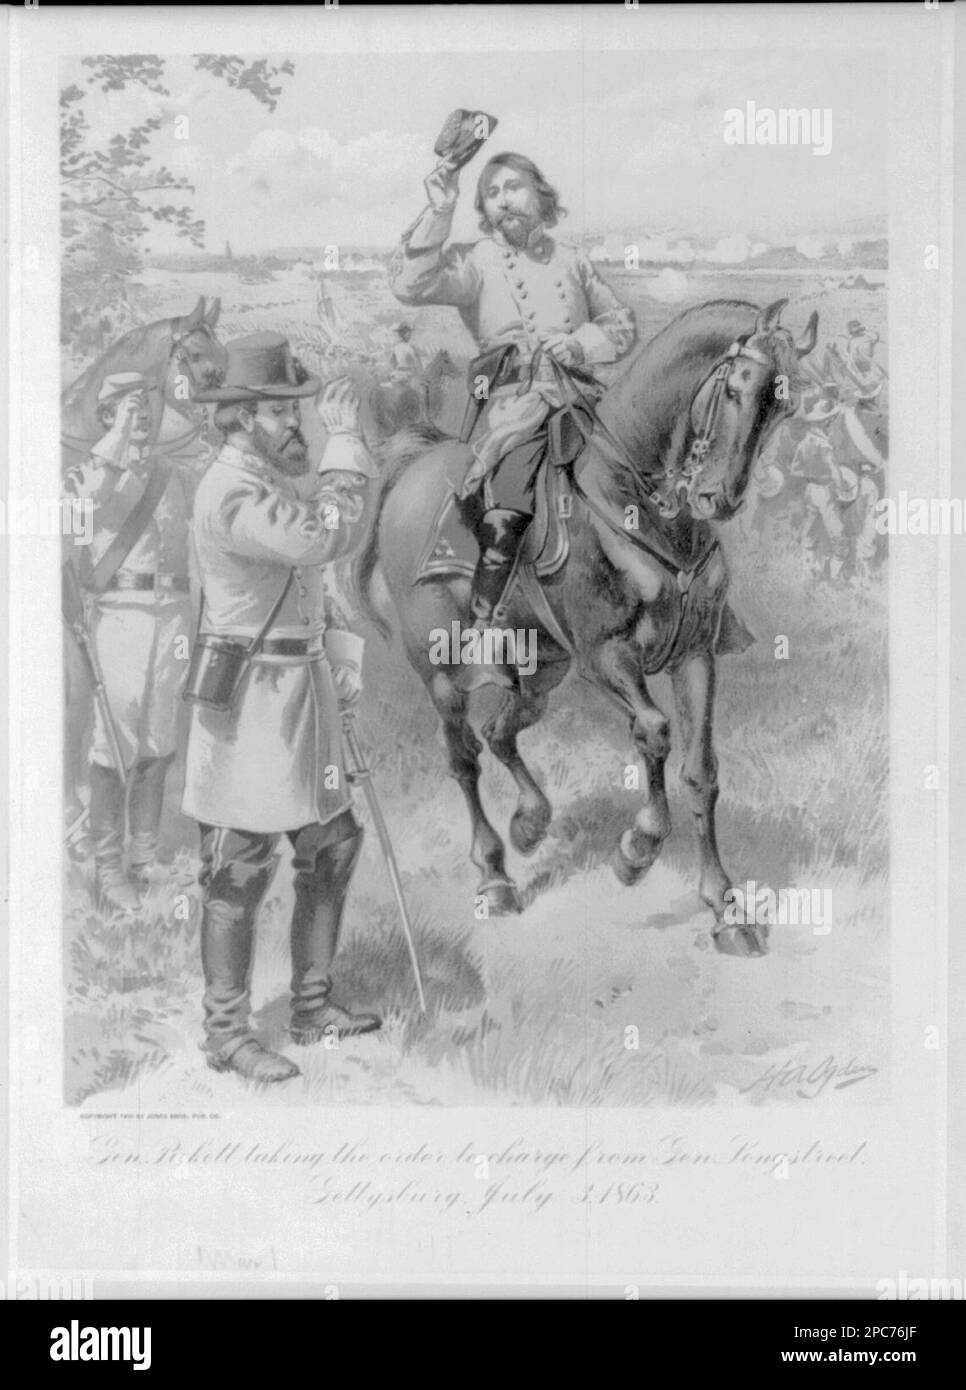 General Pickett taking the order to charge from General Longstreet, Gettysburg, July 3, 1864 / H.A. Ogden.. D4750 U.S. Copyright Office, Title from item, Signed on stone on lower right: H.A. Odgen, Printed on lower left: Copyright 1900 by Jones Bros. Pub. Co, Copyright number inscribed in ink on back, Date of copyright deposit stamped on back. Pickett, George E, (George Edward), 1825-1875, Military service, Longstreet, James, 1821-1904, Military service, Gettysburg, Battle of, Gettysburg, Pa, 1863, United States, History, Civil War, 1861-1865, Military personnel, Confederate. Stock Photo